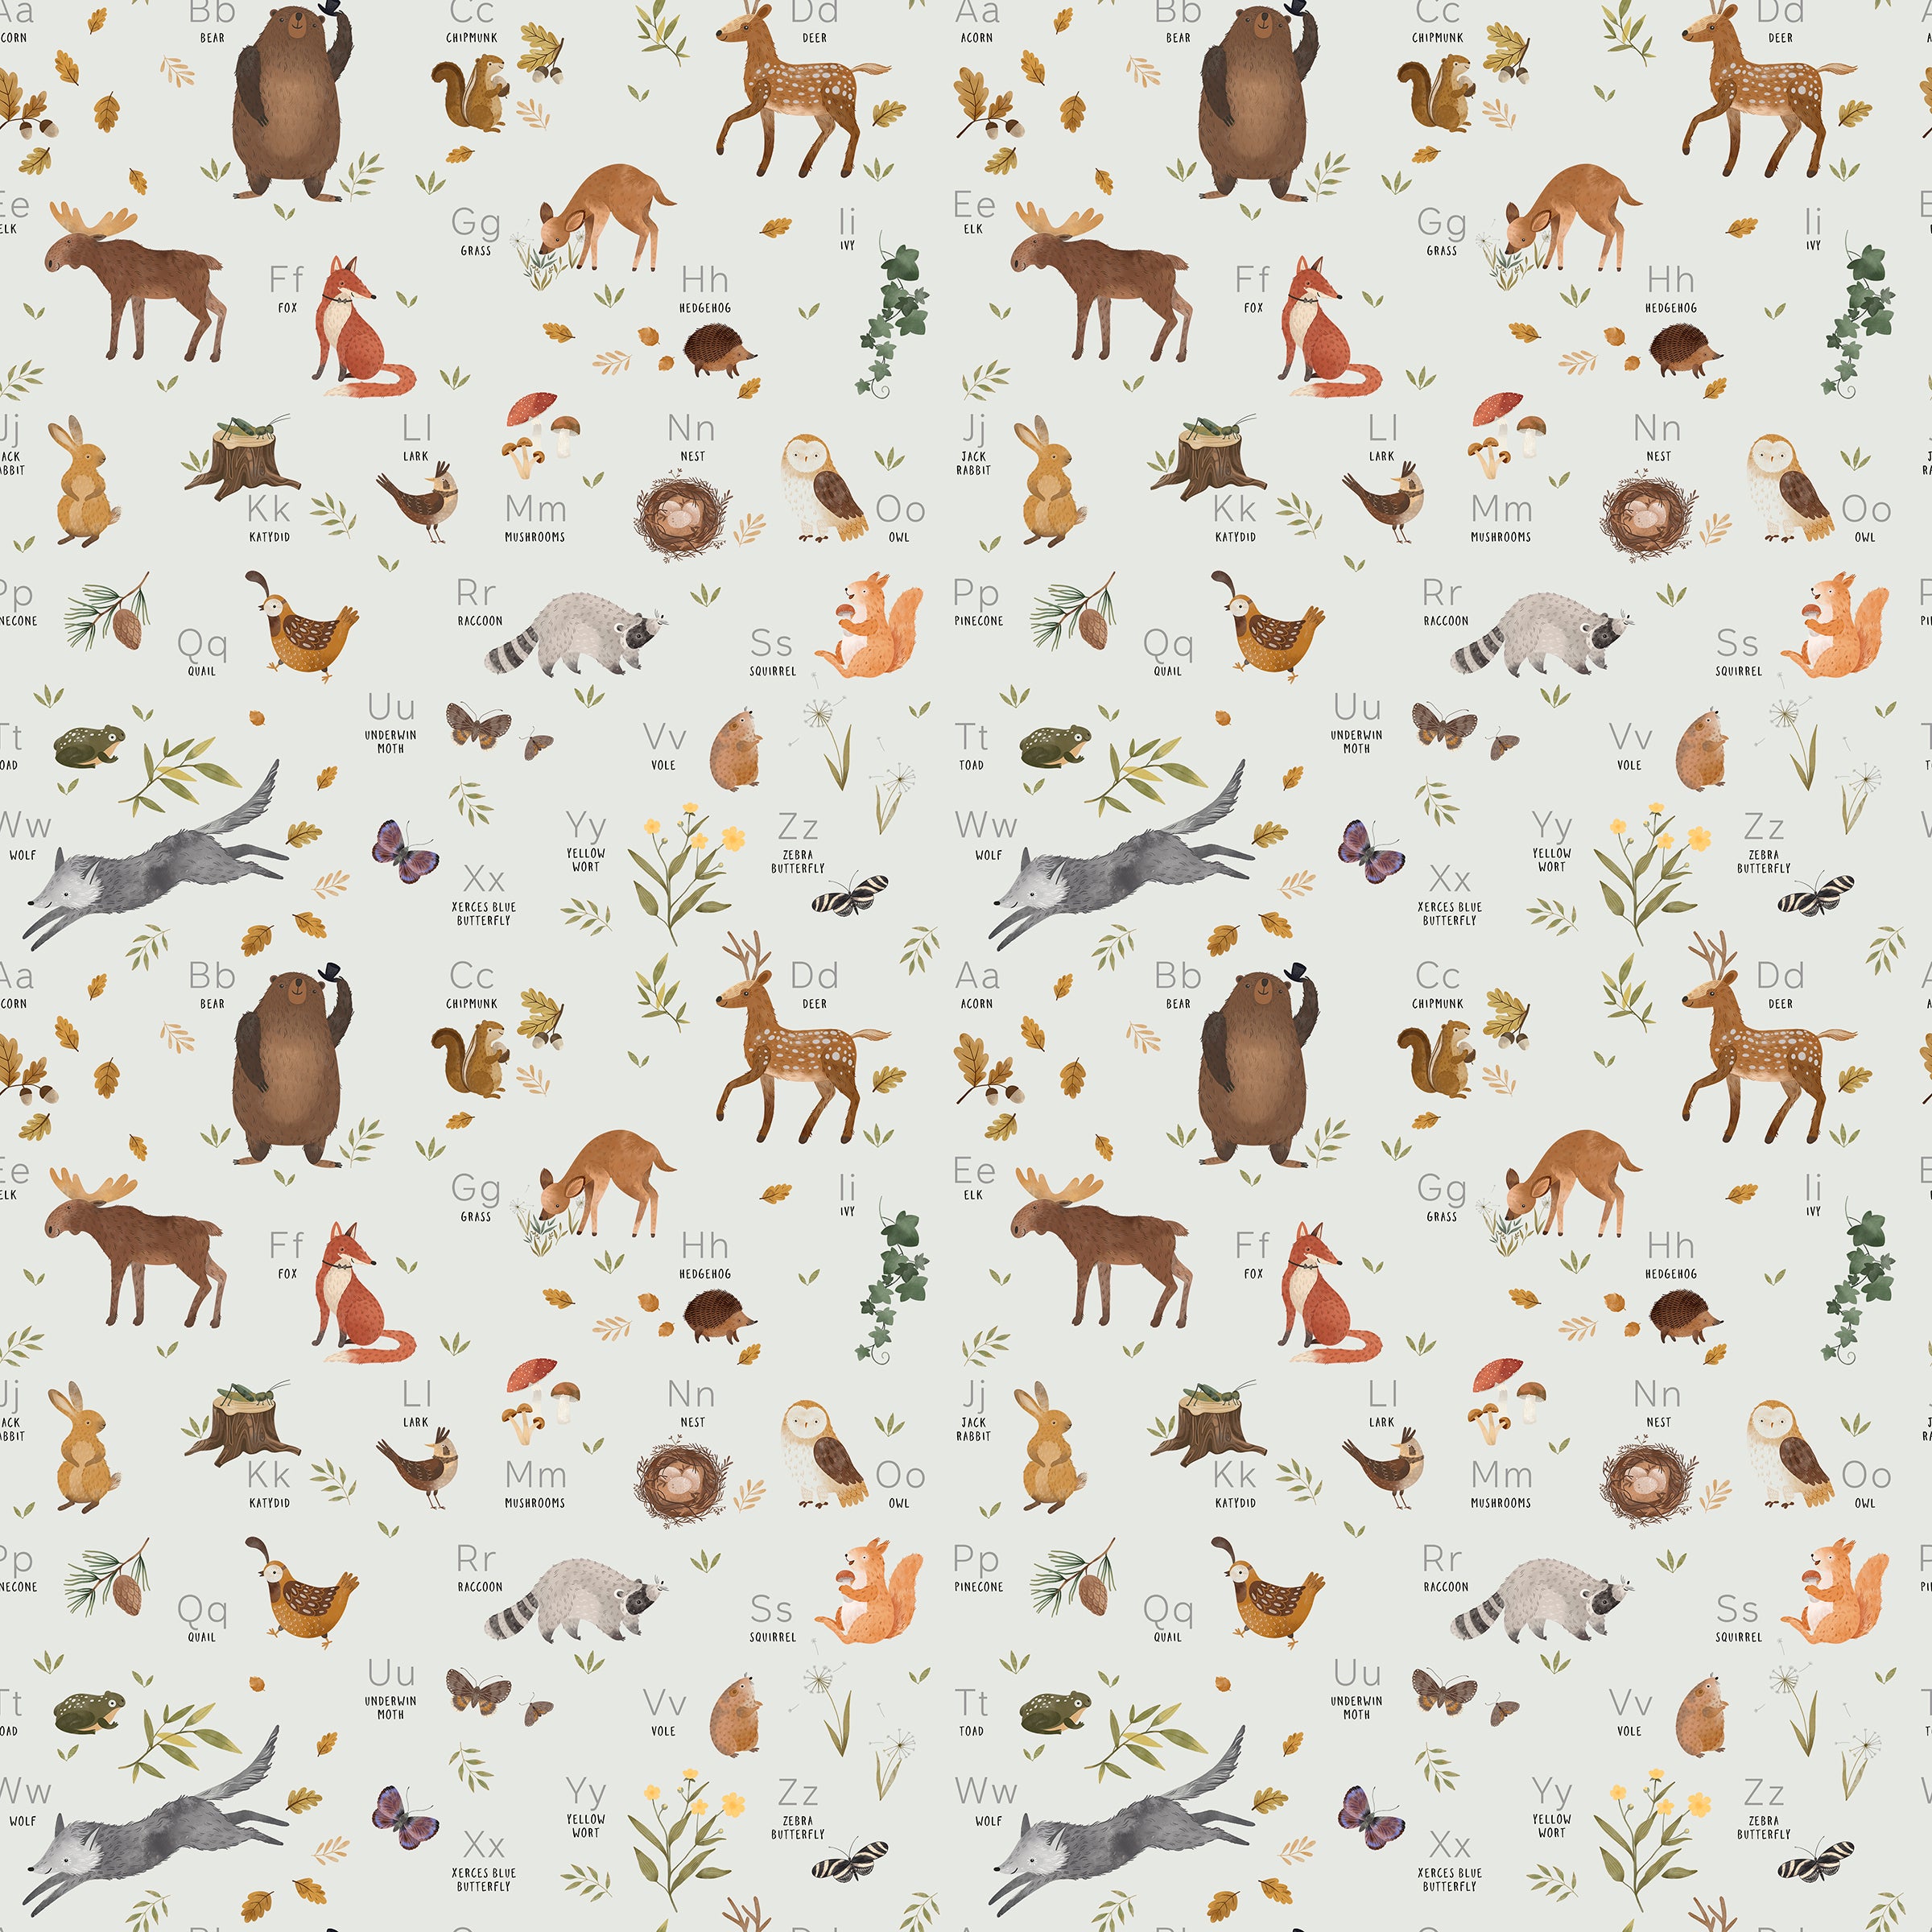 A detailed view of the 'Forest Alphabet Animal Wallpaper', showcasing an array of woodland creatures alongside letters of the alphabet. Illustrations include foxes, bears, deer, and more, interspersed with flora and fauna, all depicted in a charming, hand-drawn style against a light background.